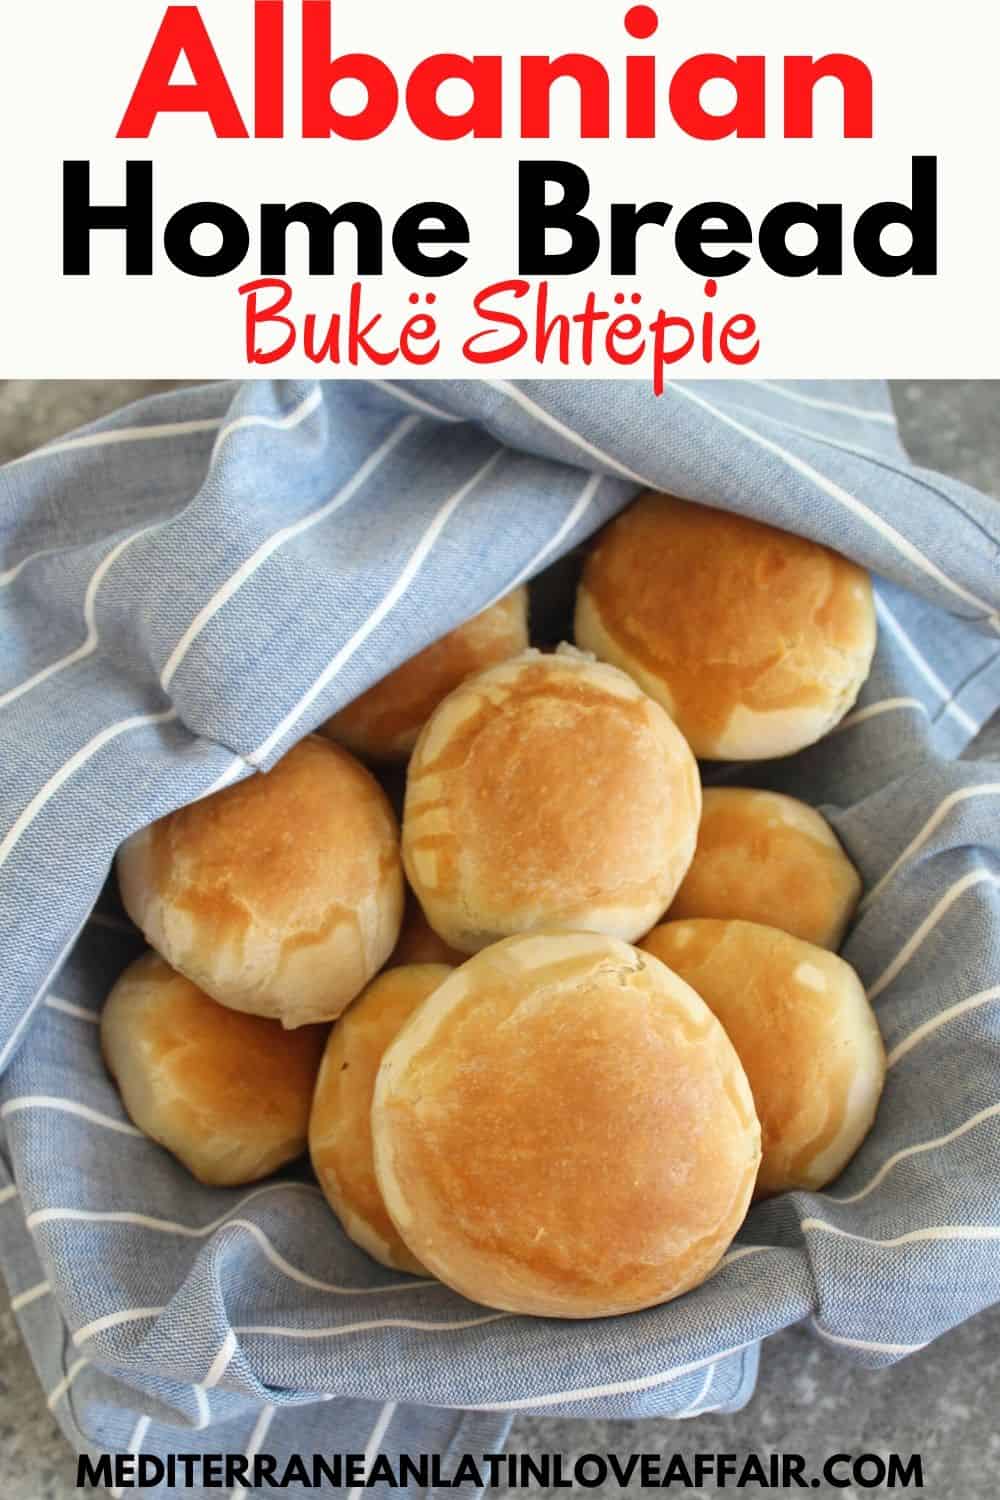 Albanian Home Bread or Buke Shtepie - This is an image made for this post for Pinterest. It shows the bread basket lined with a lined and the fresh baked bread rolls in it.